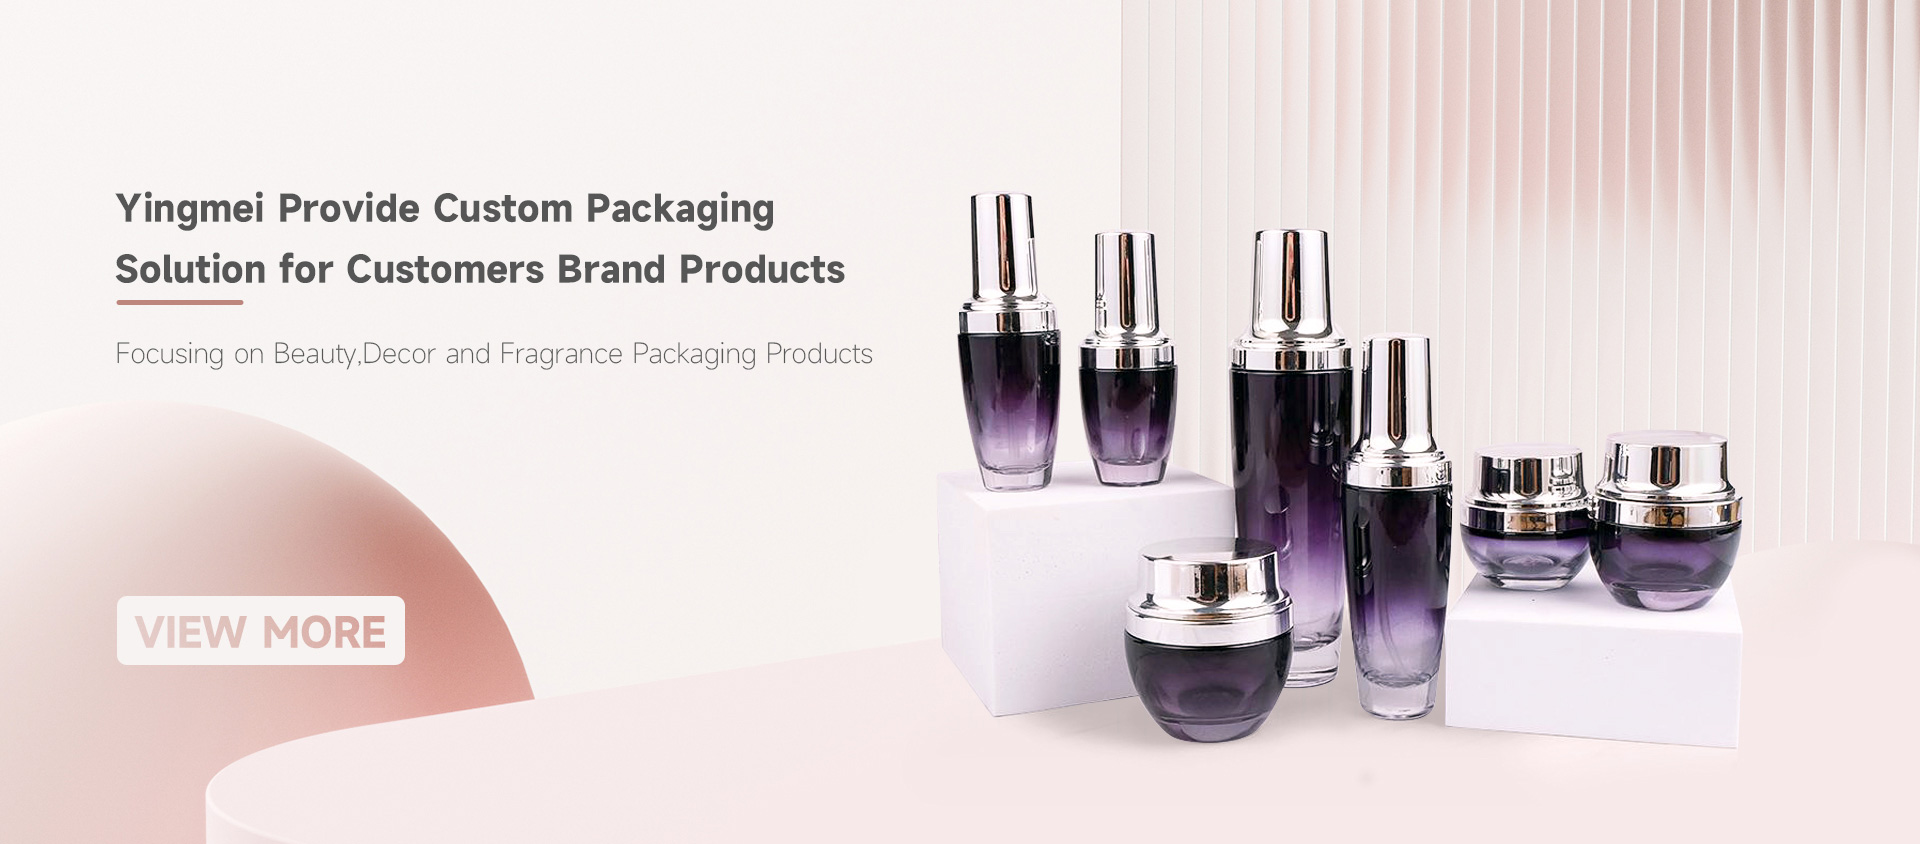 Yingmei Provide Custom Packaging Solution for Customers Brand Products